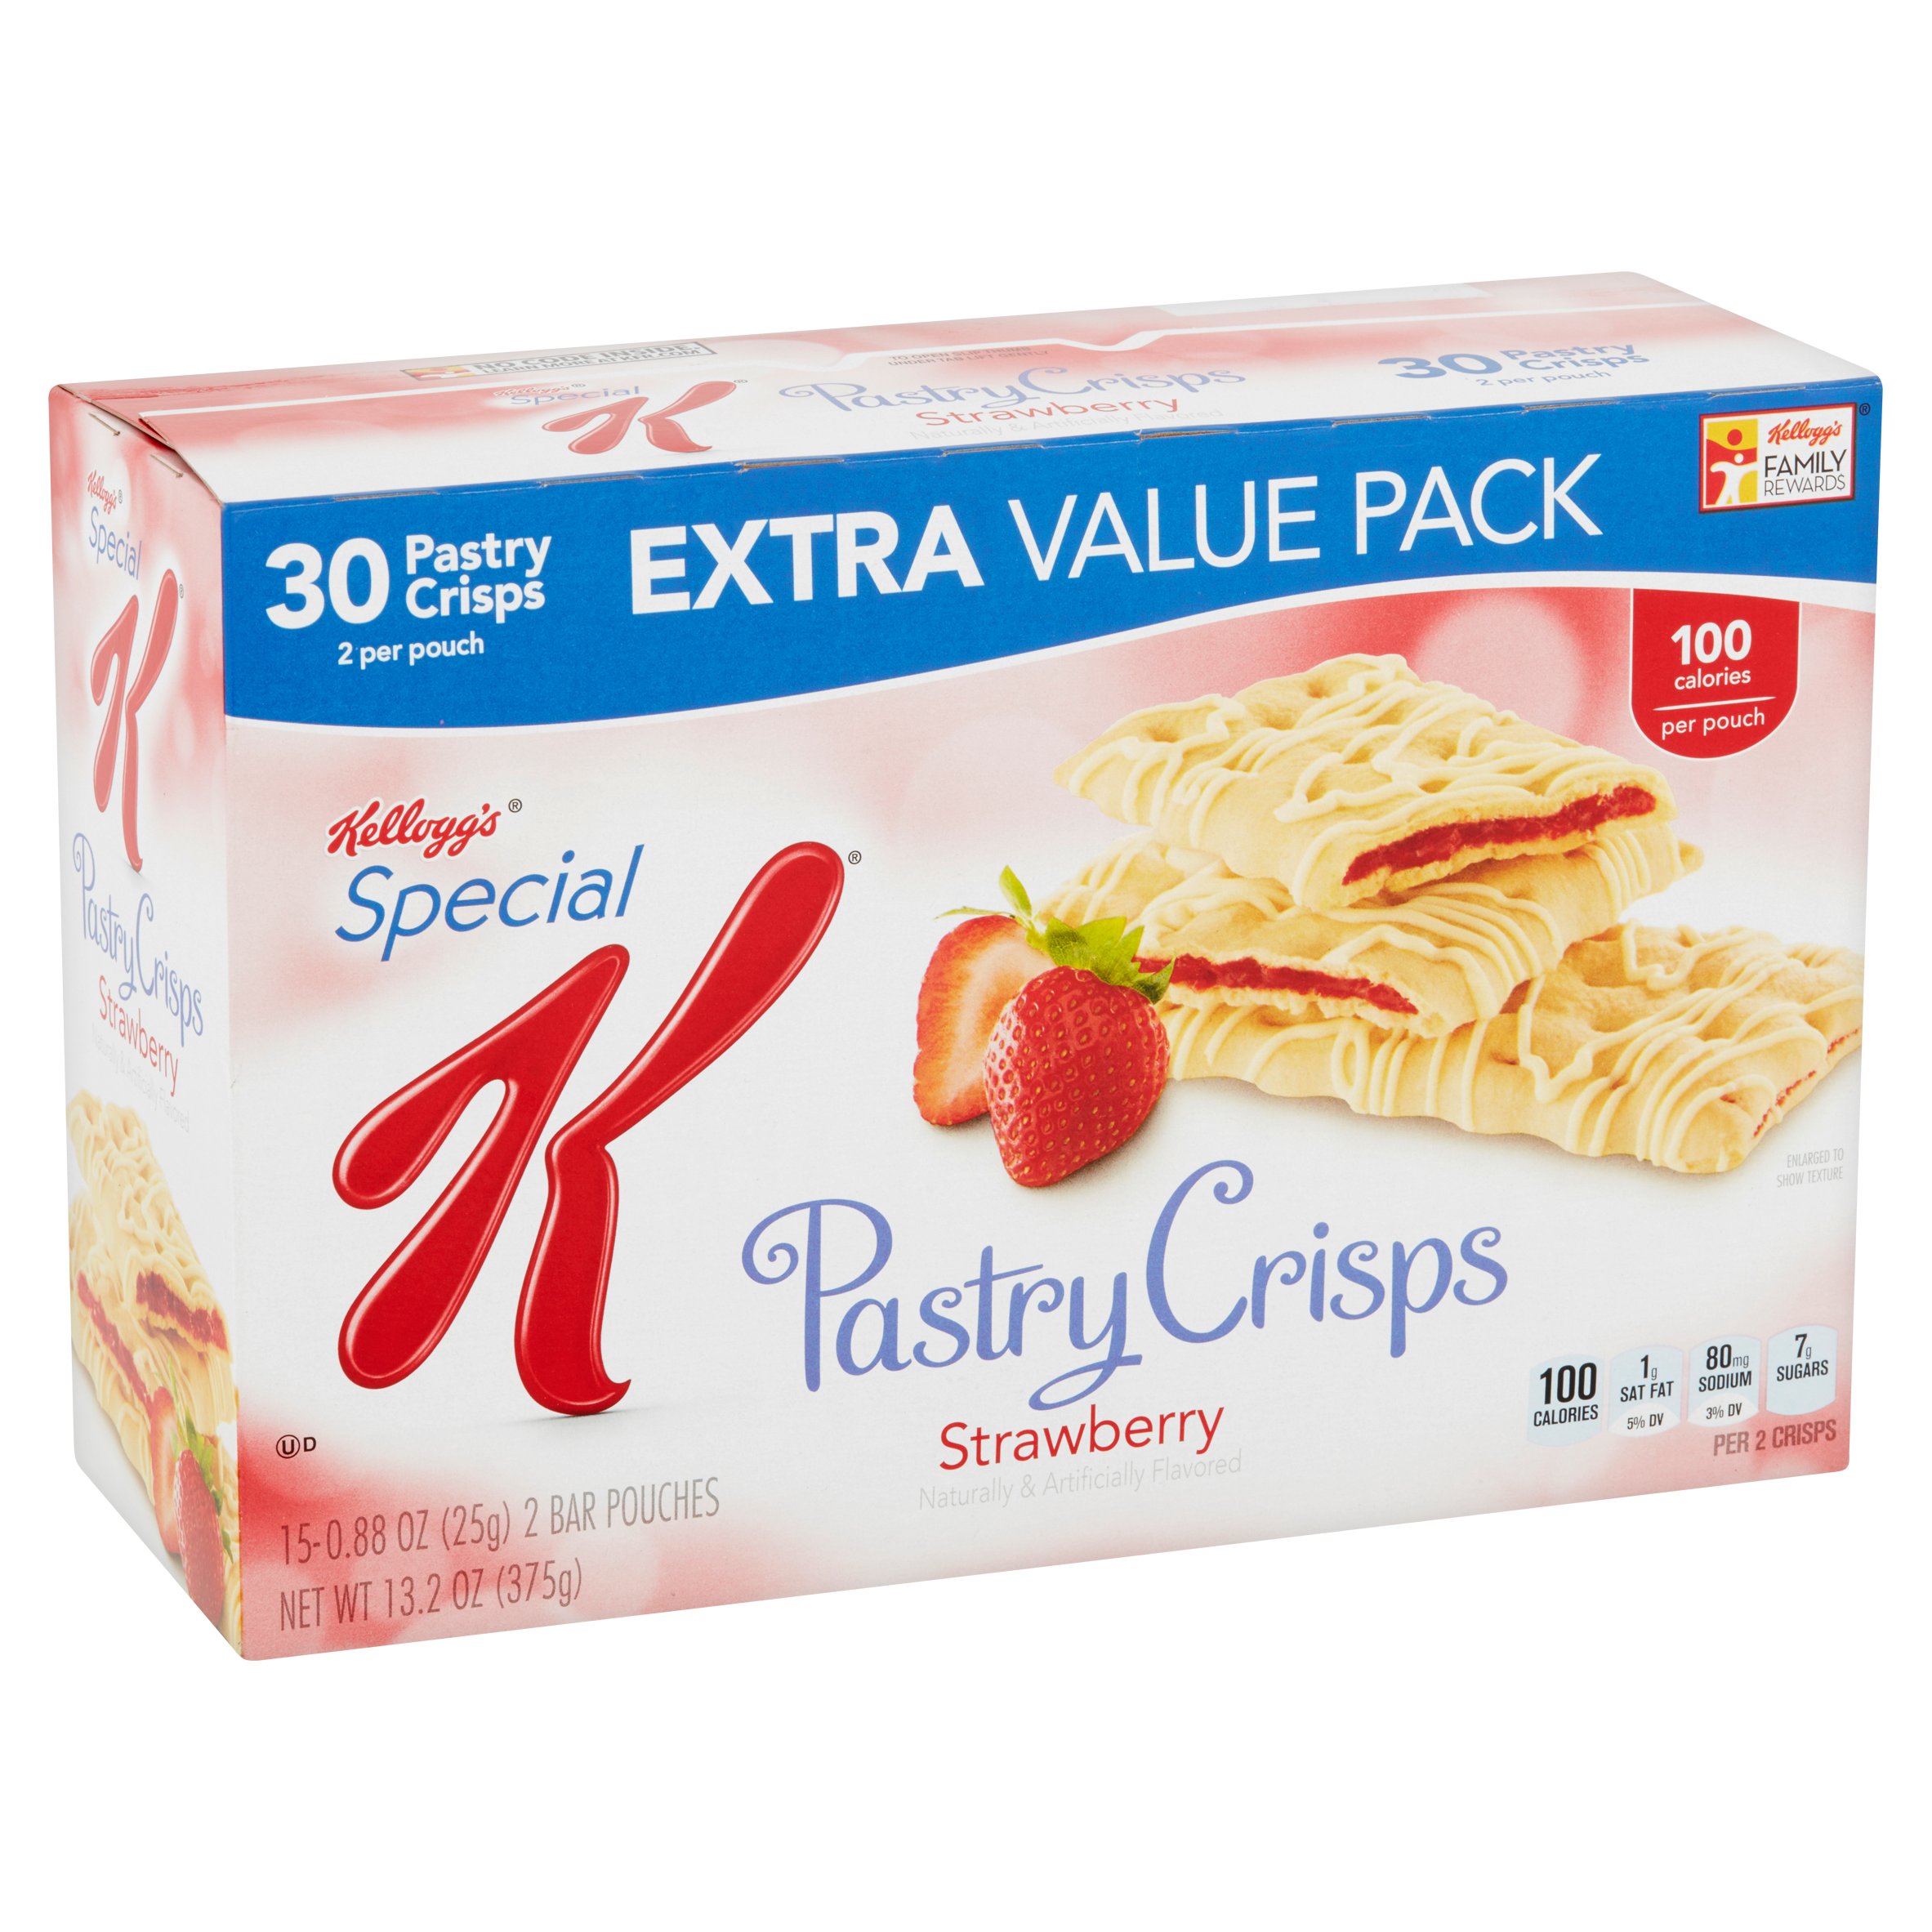 Kellogg's Special K Strawberry Pastry Crisps, 0.88 oz, 15 count - image 2 of 5